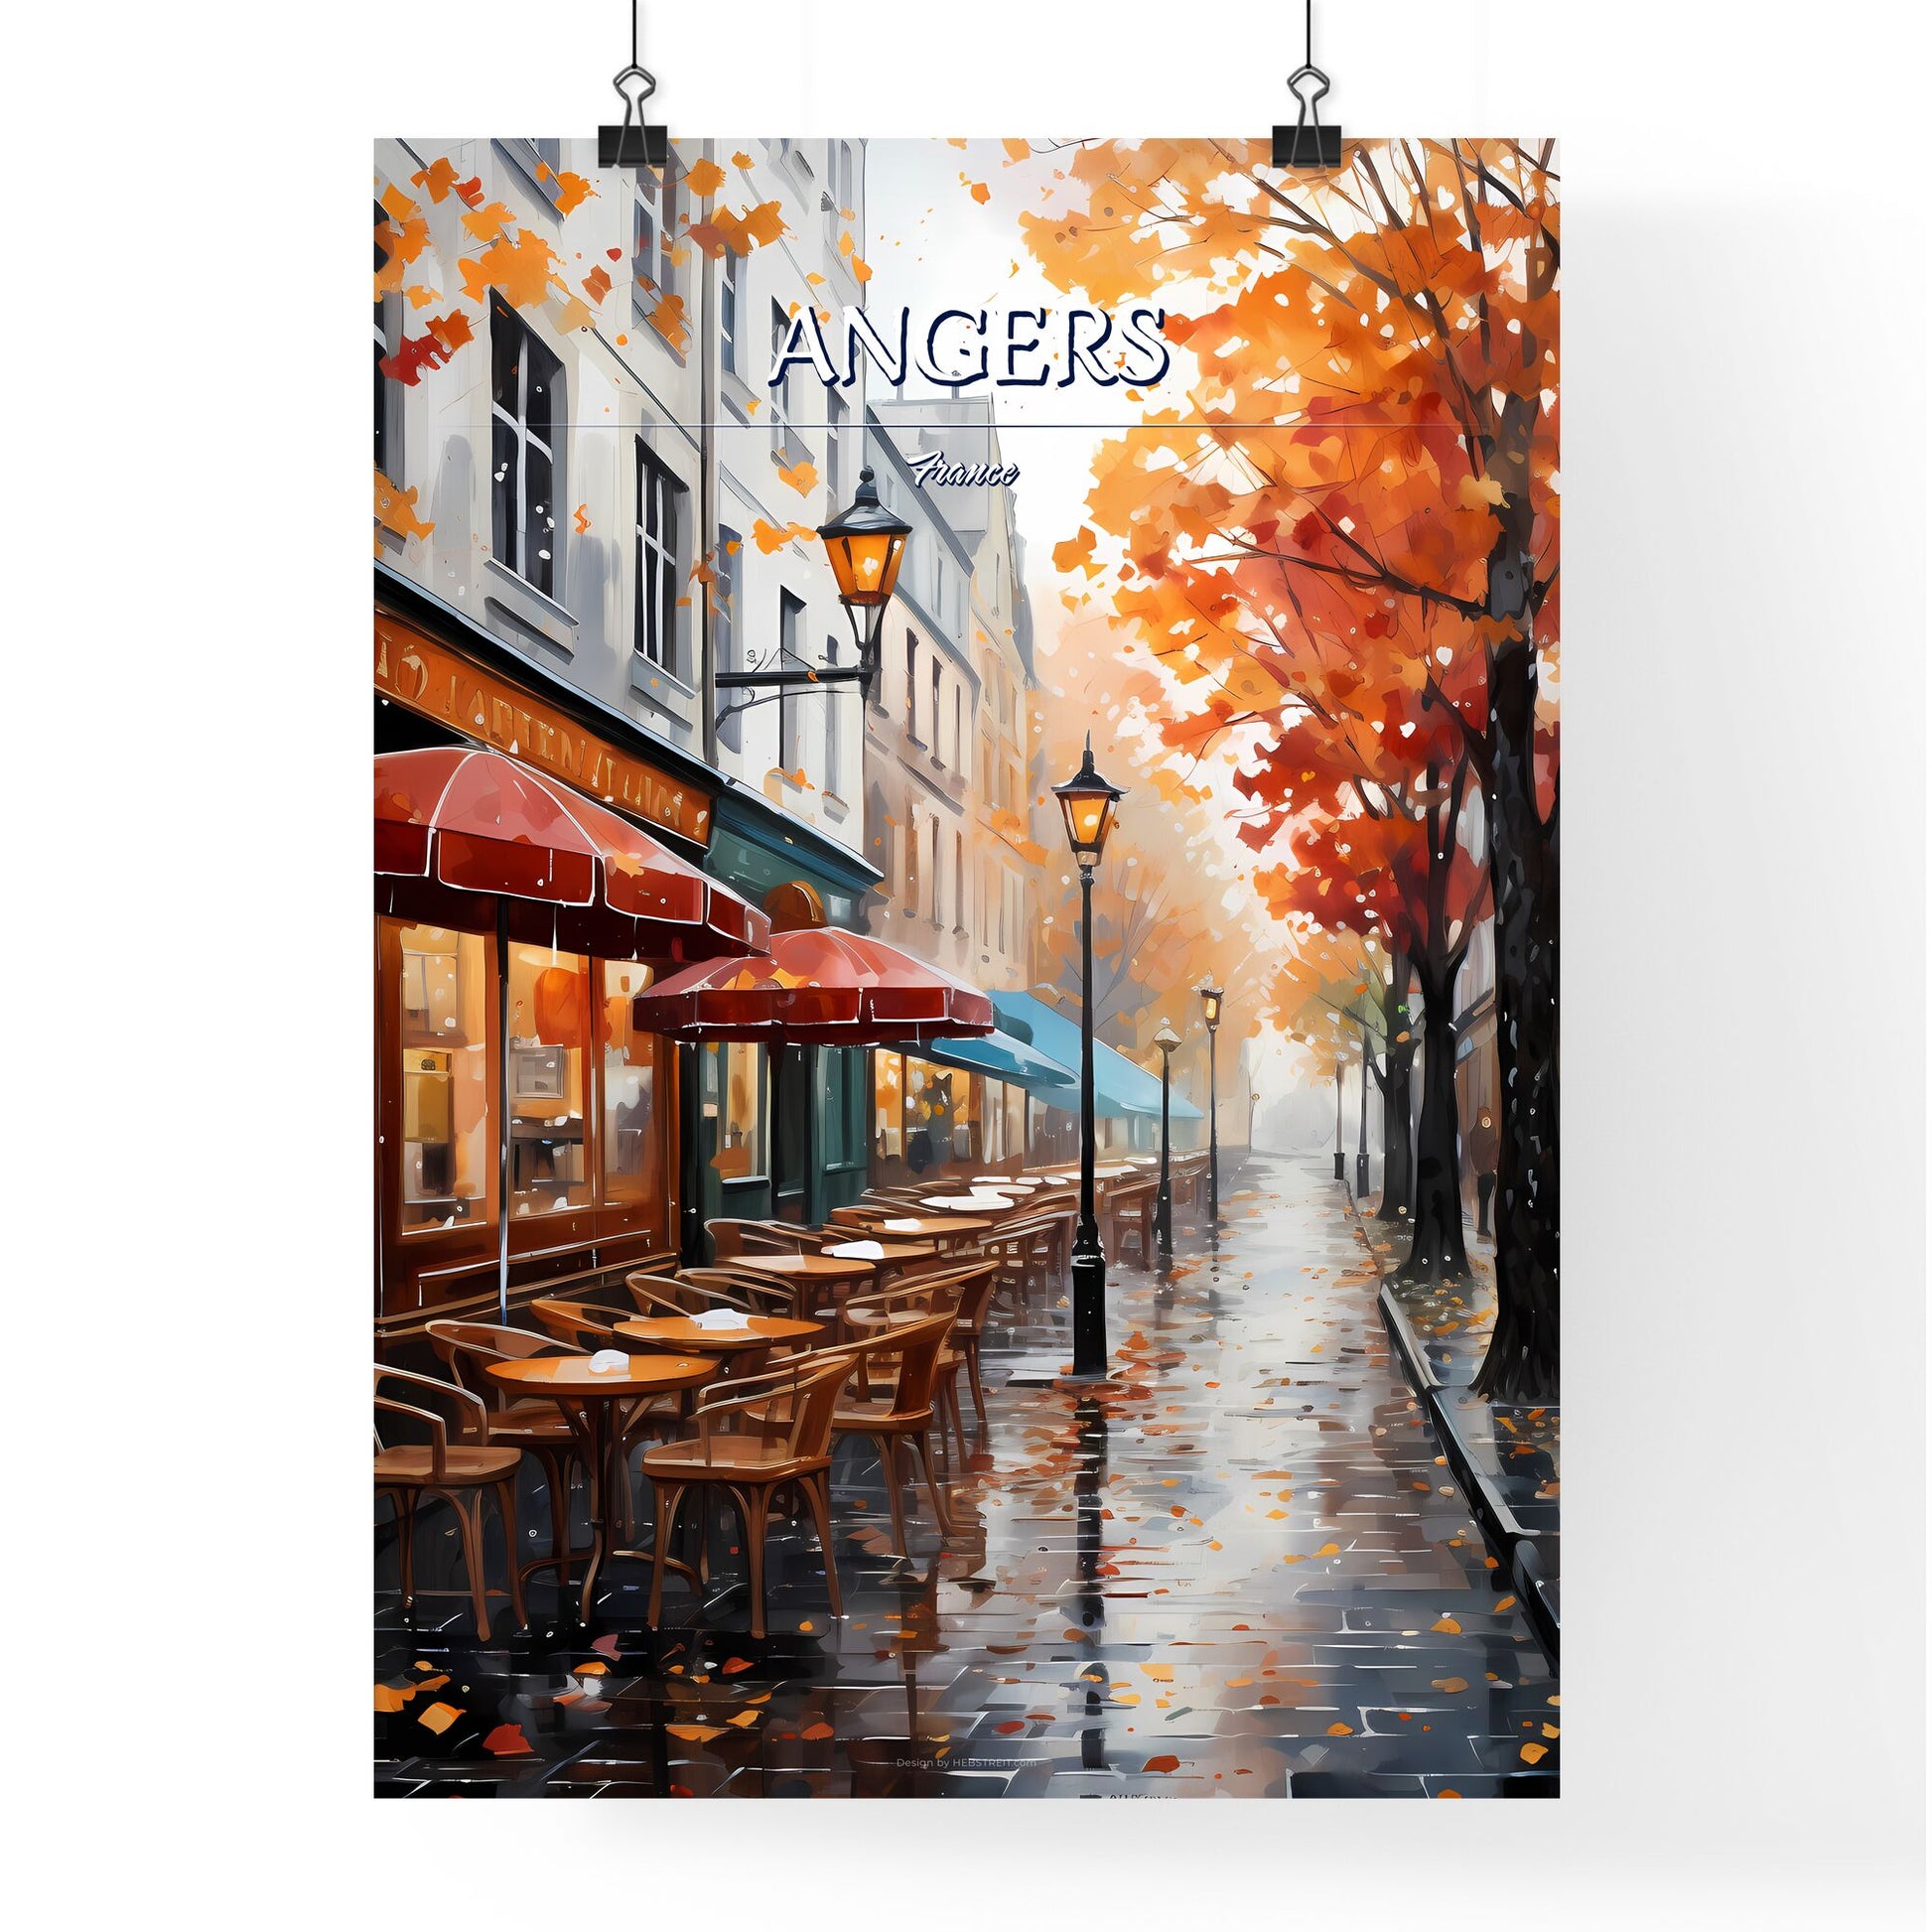 Angers, France - Art print of a street with tables and umbrellas on it Default Title